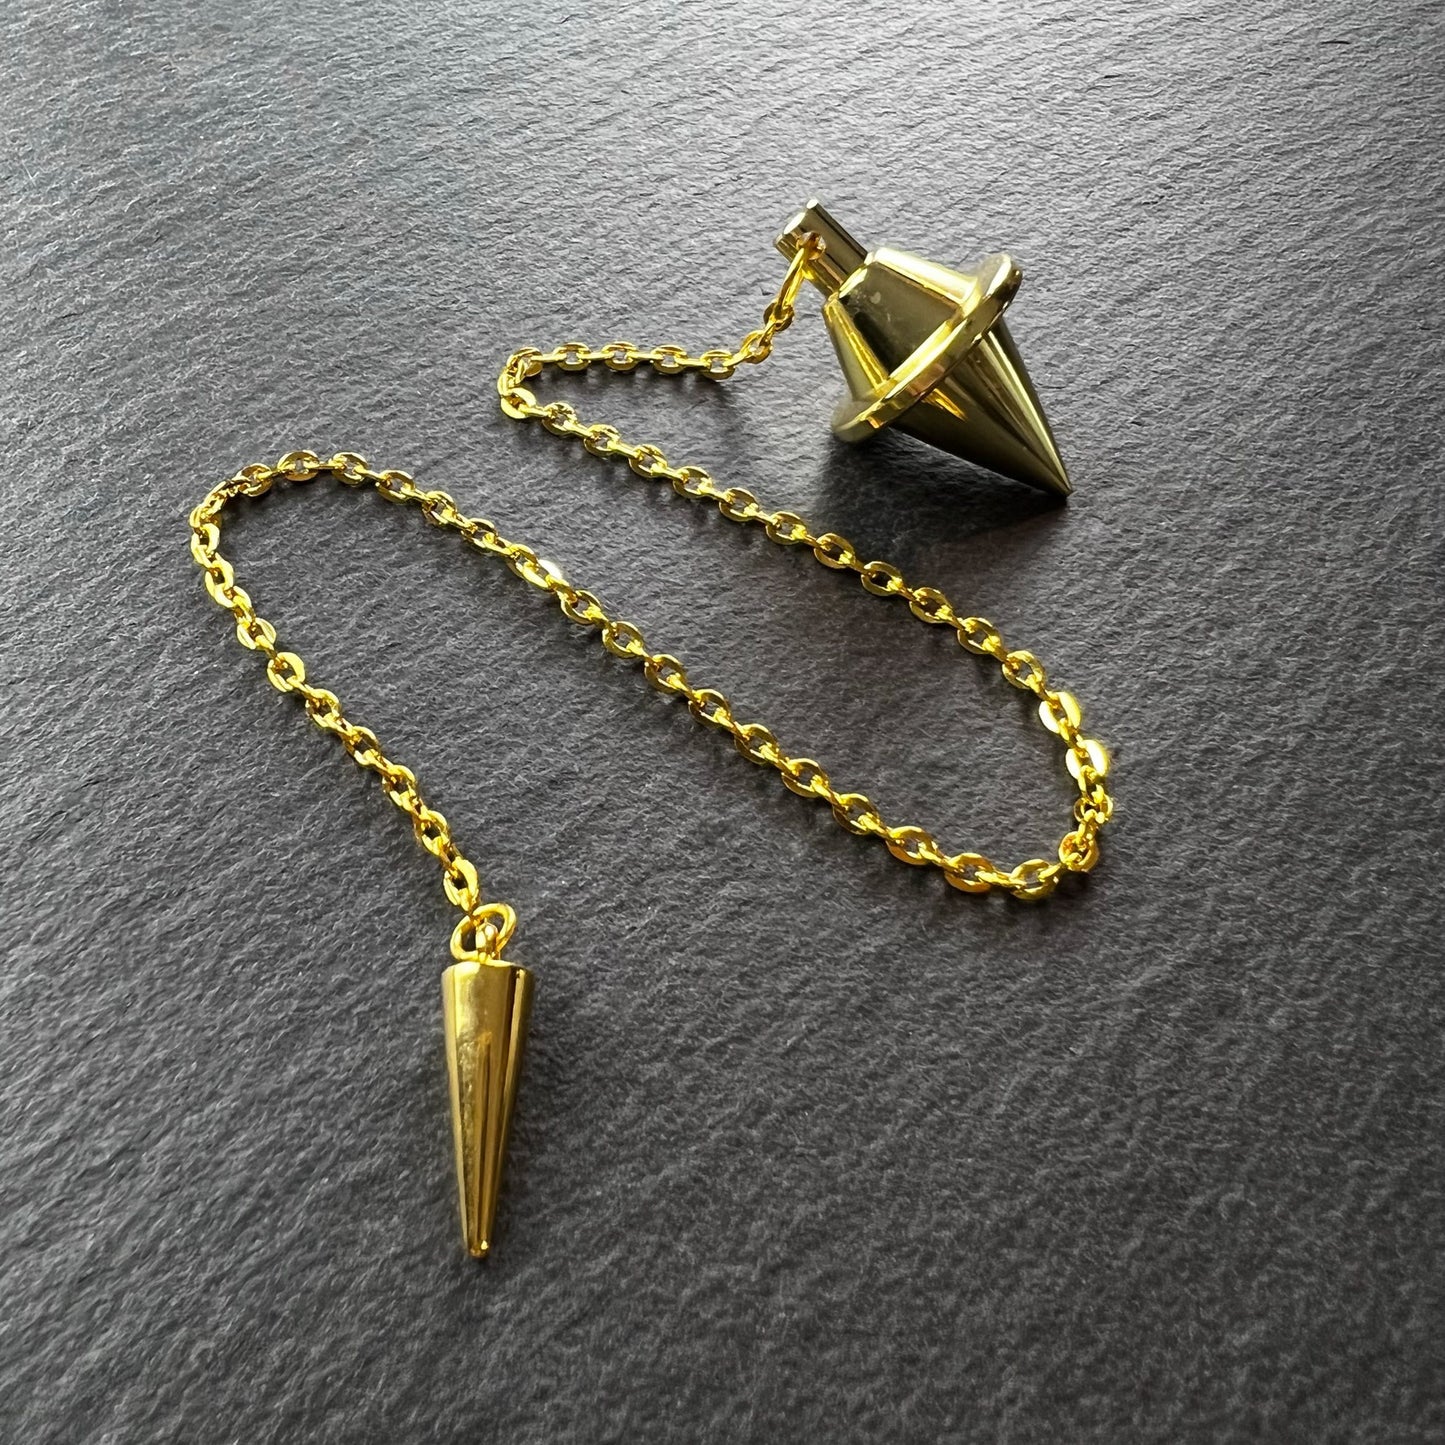 Golden double cone pendulum with a spike charm Baguette Magick